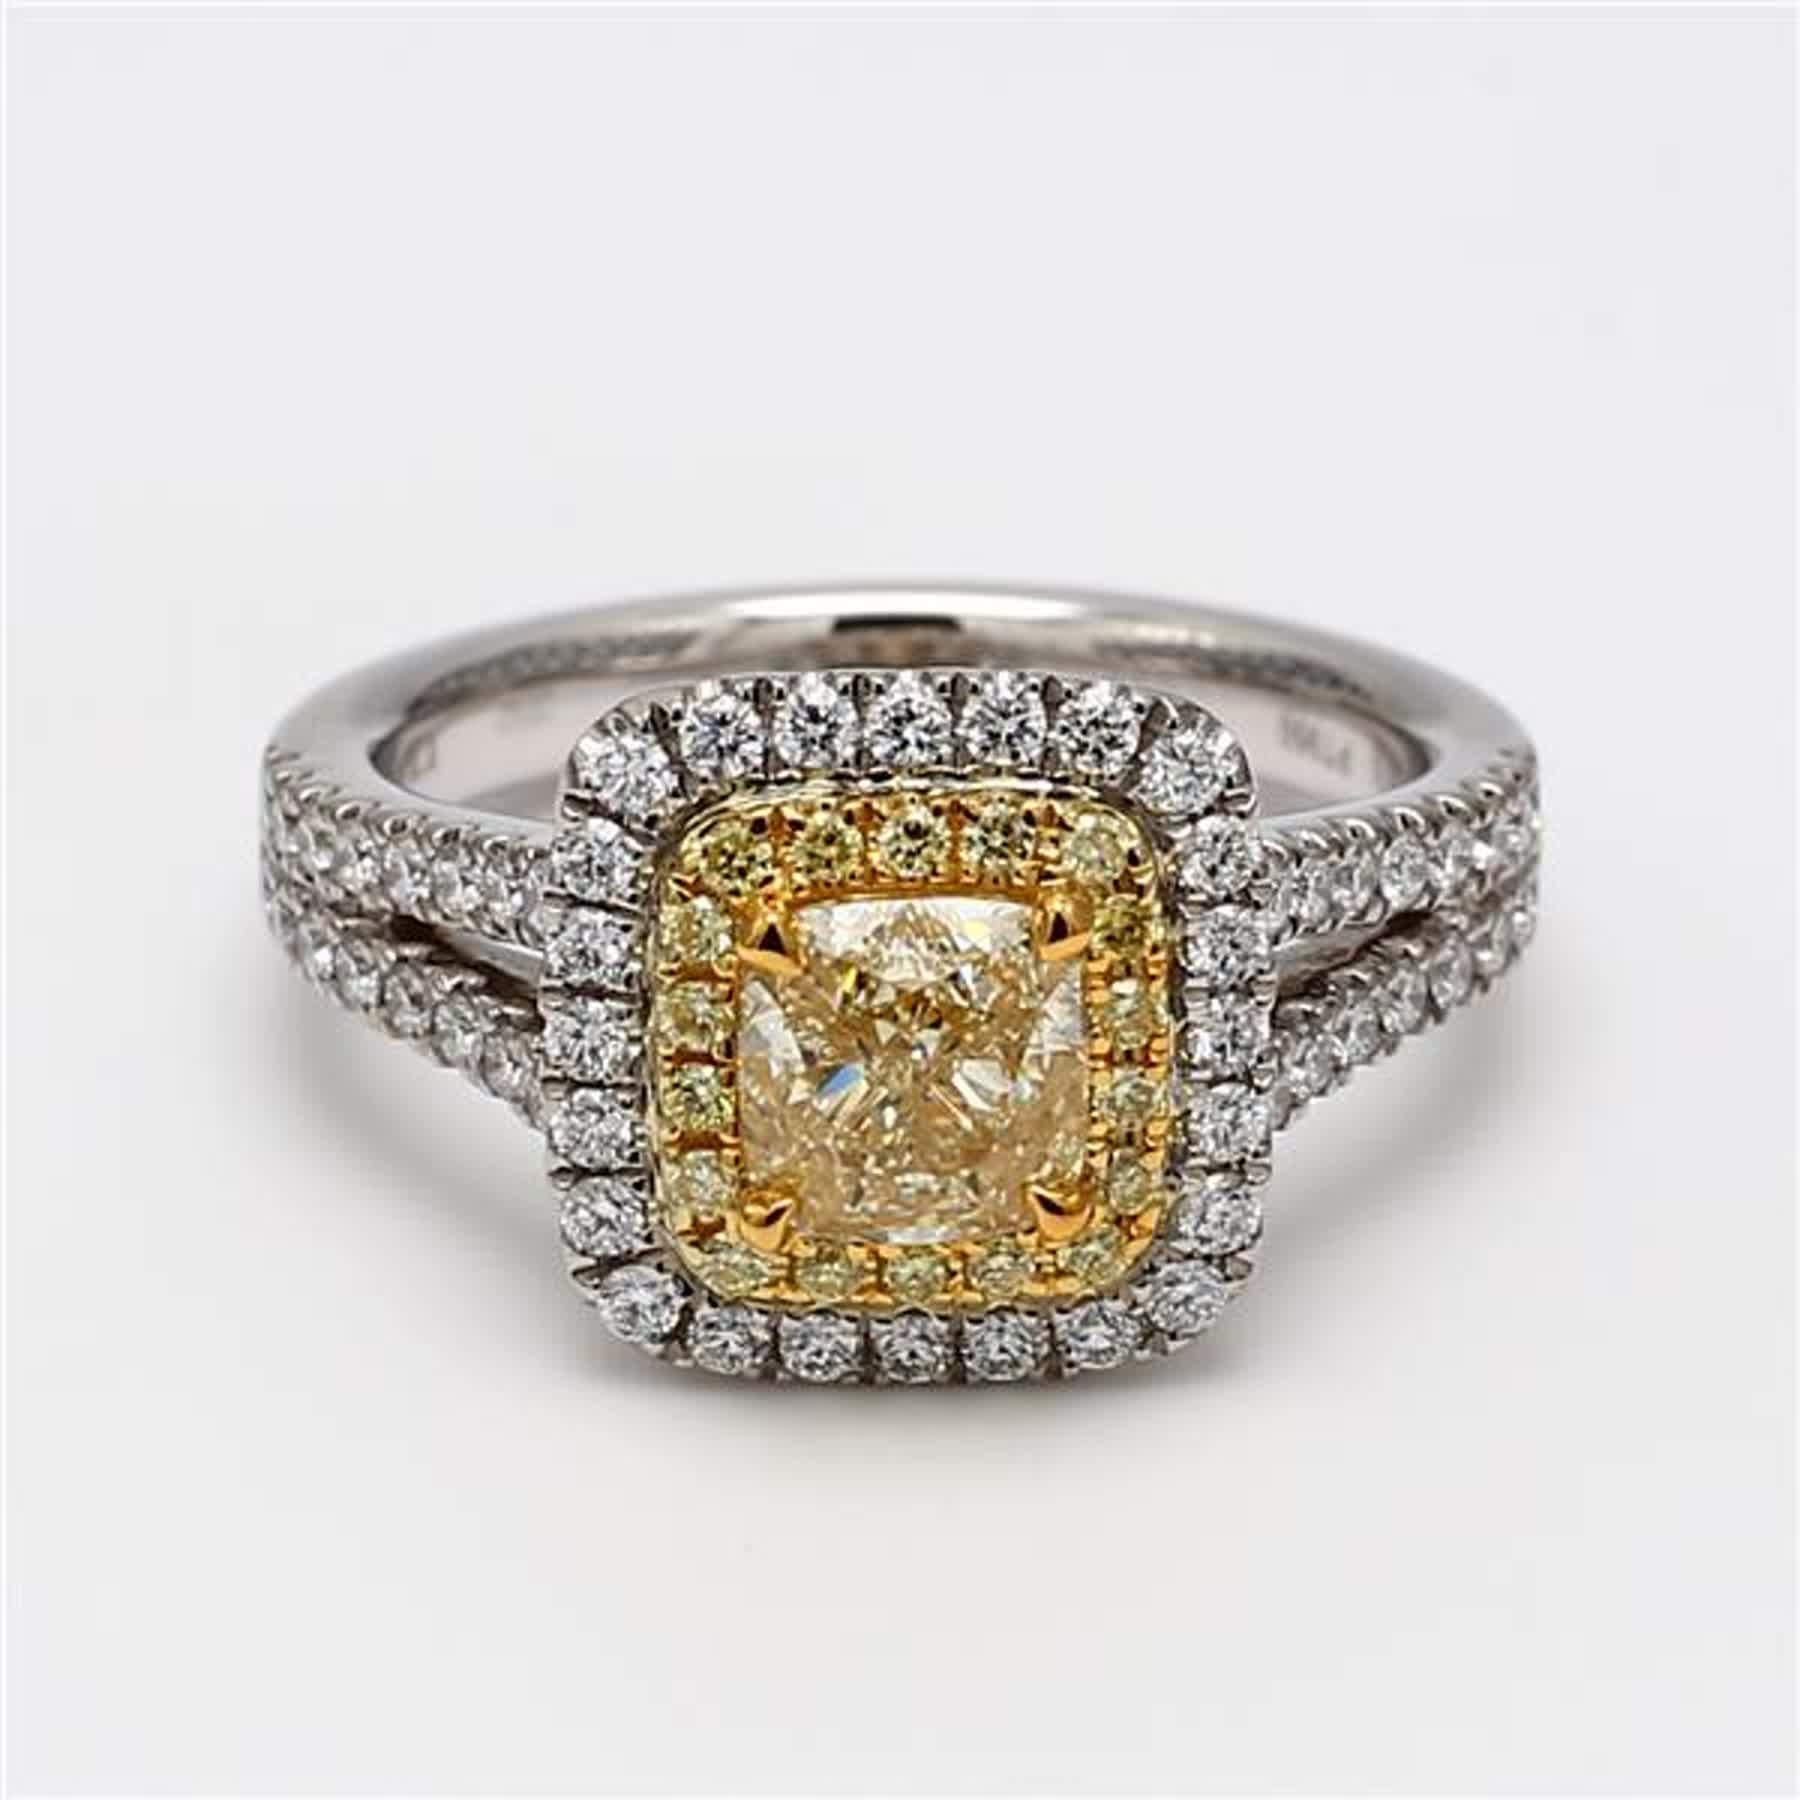 RareGemWorld's classic GIA certified diamond ring. Mounted in a beautiful 18K Yellow and White Gold and Platinum setting with a natural cushion cut yellow diamond. The yellow diamond is surrounded by round natural yellow diamond melee and round